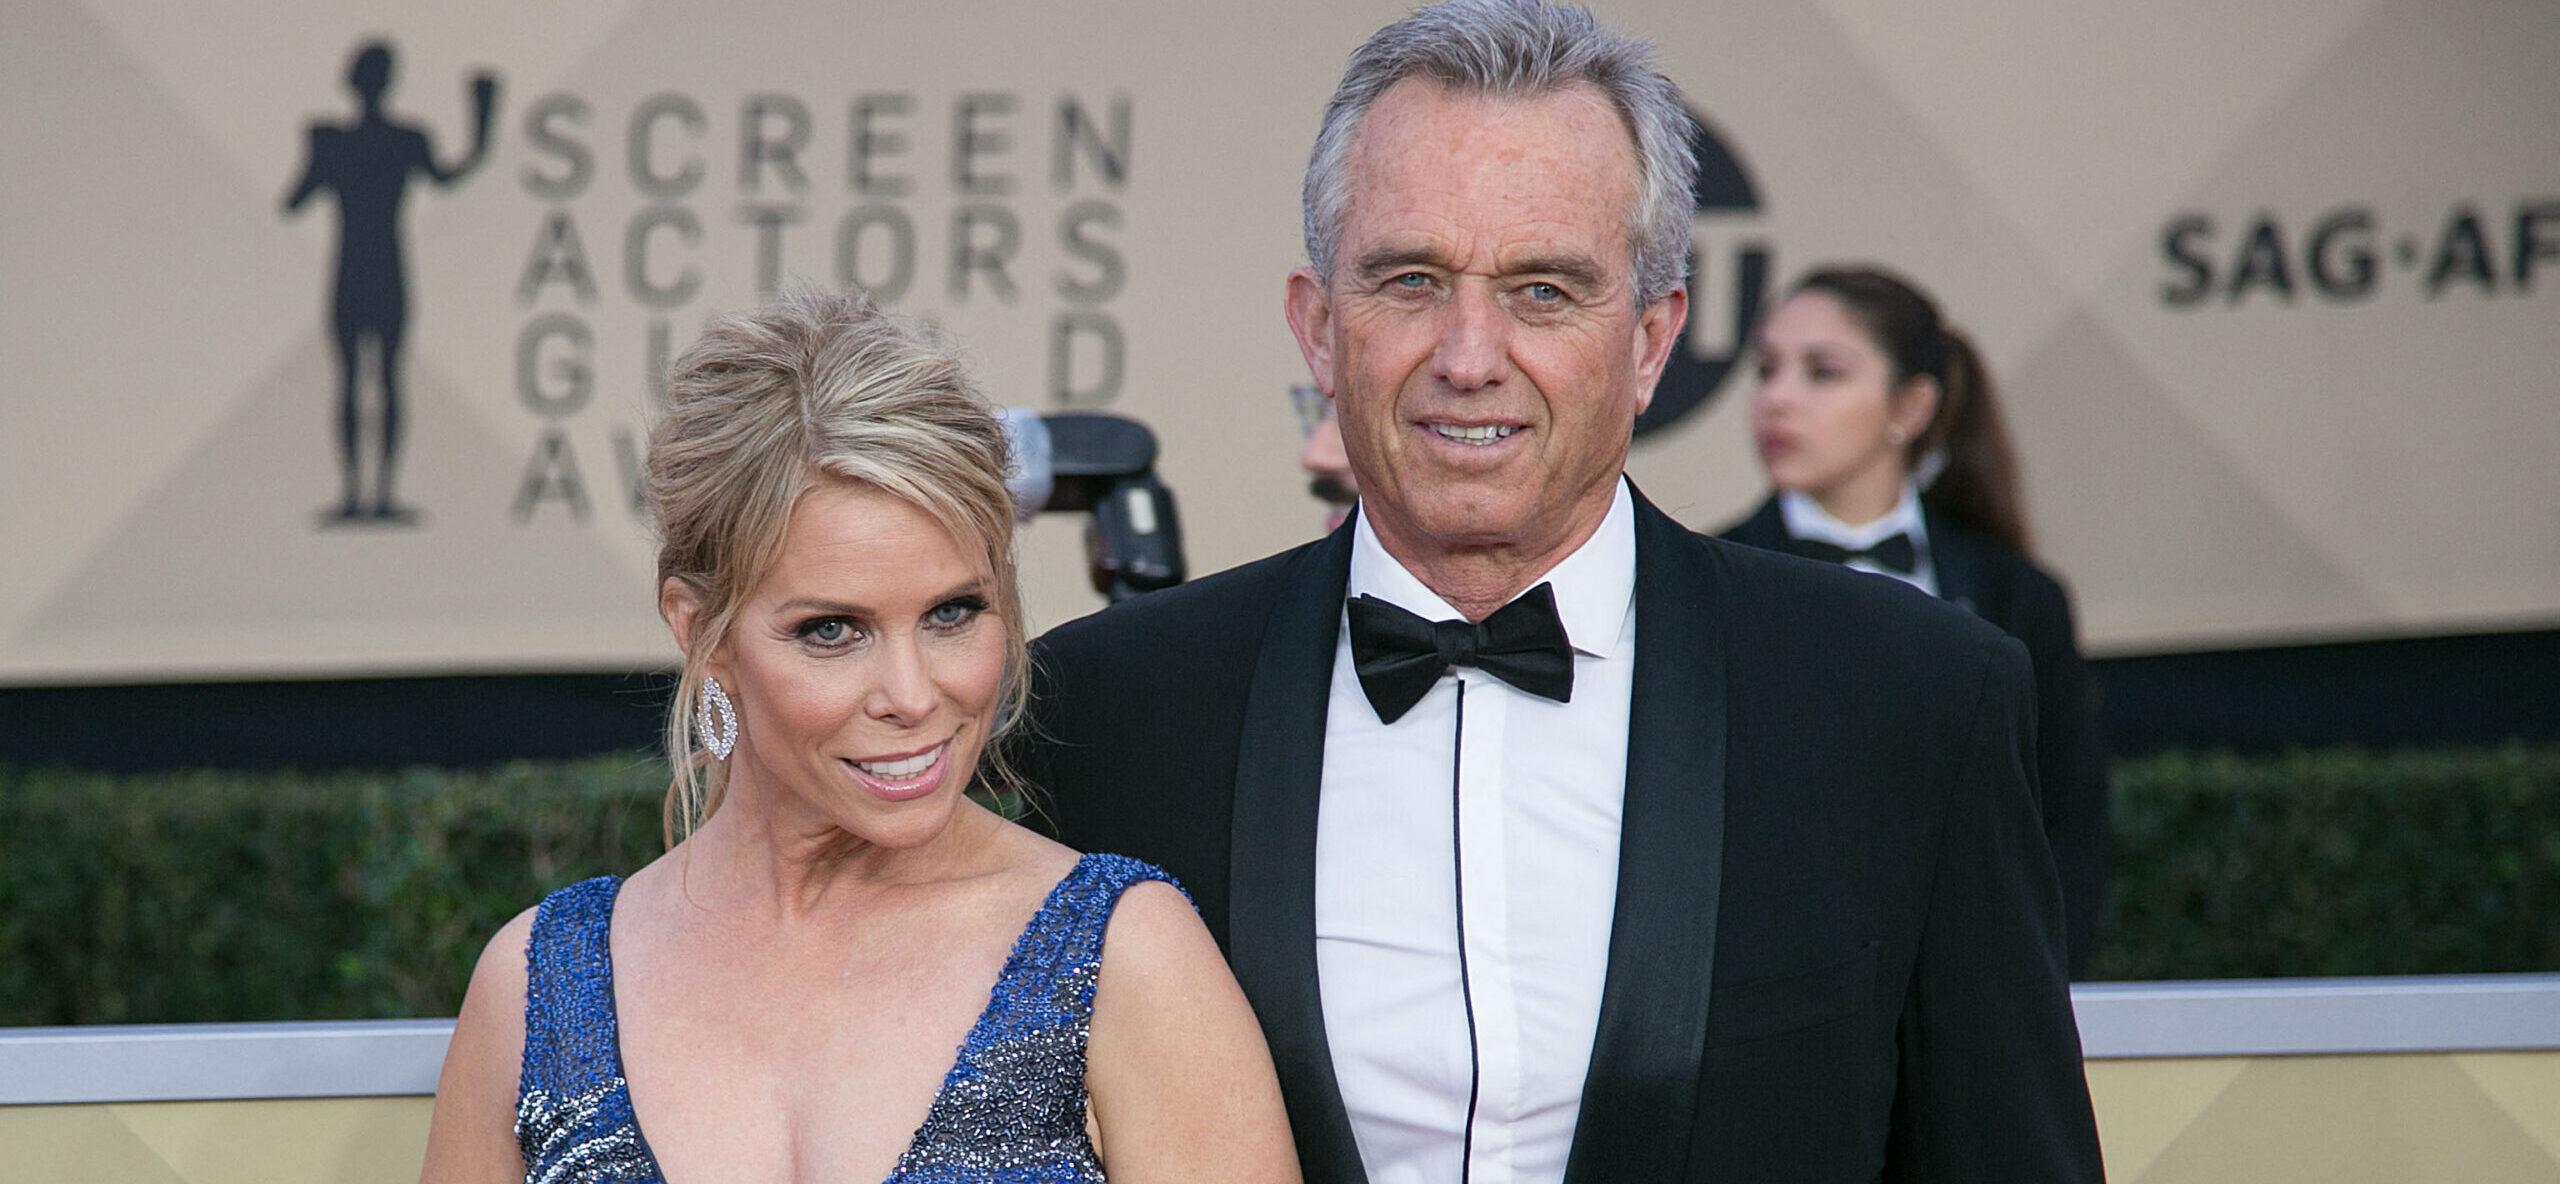 Man Arrested For Attempting To Break Into Robert Kennedy Jr. & Cheryl Hines’ Home